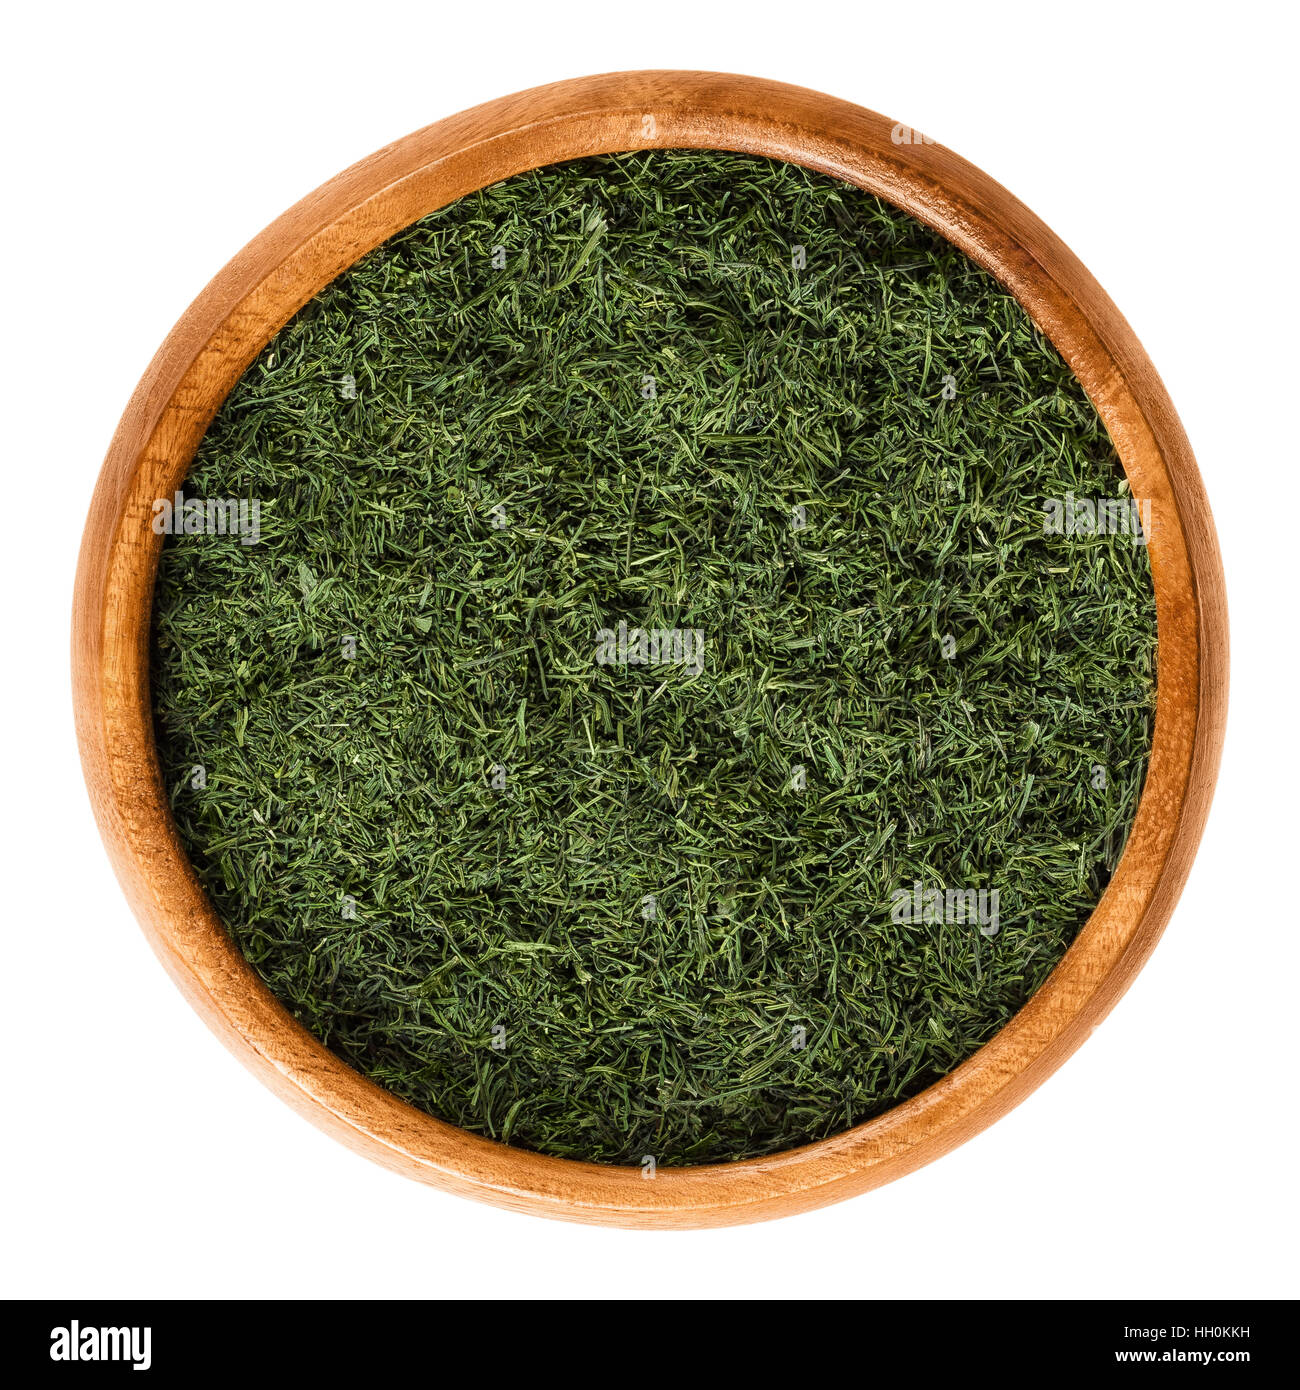 Dried dill fronds in wooden bowl, also called dill weed. Shredded green leaves of Anethum graveolens, used as herb and spice. Stock Photo